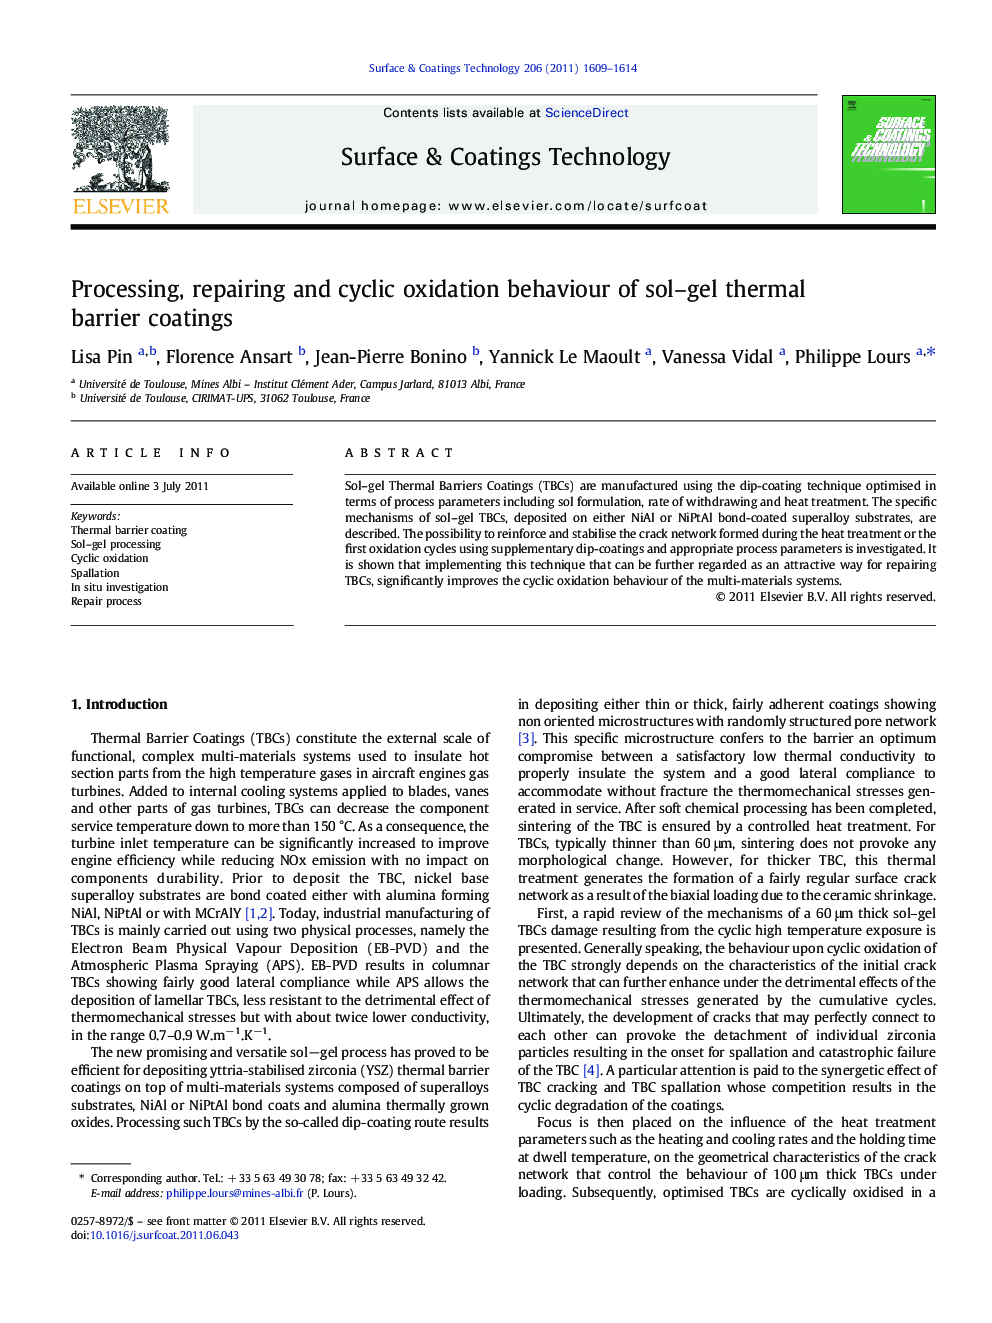 Processing, repairing and cyclic oxidation behaviour of sol-gel thermal barrier coatings